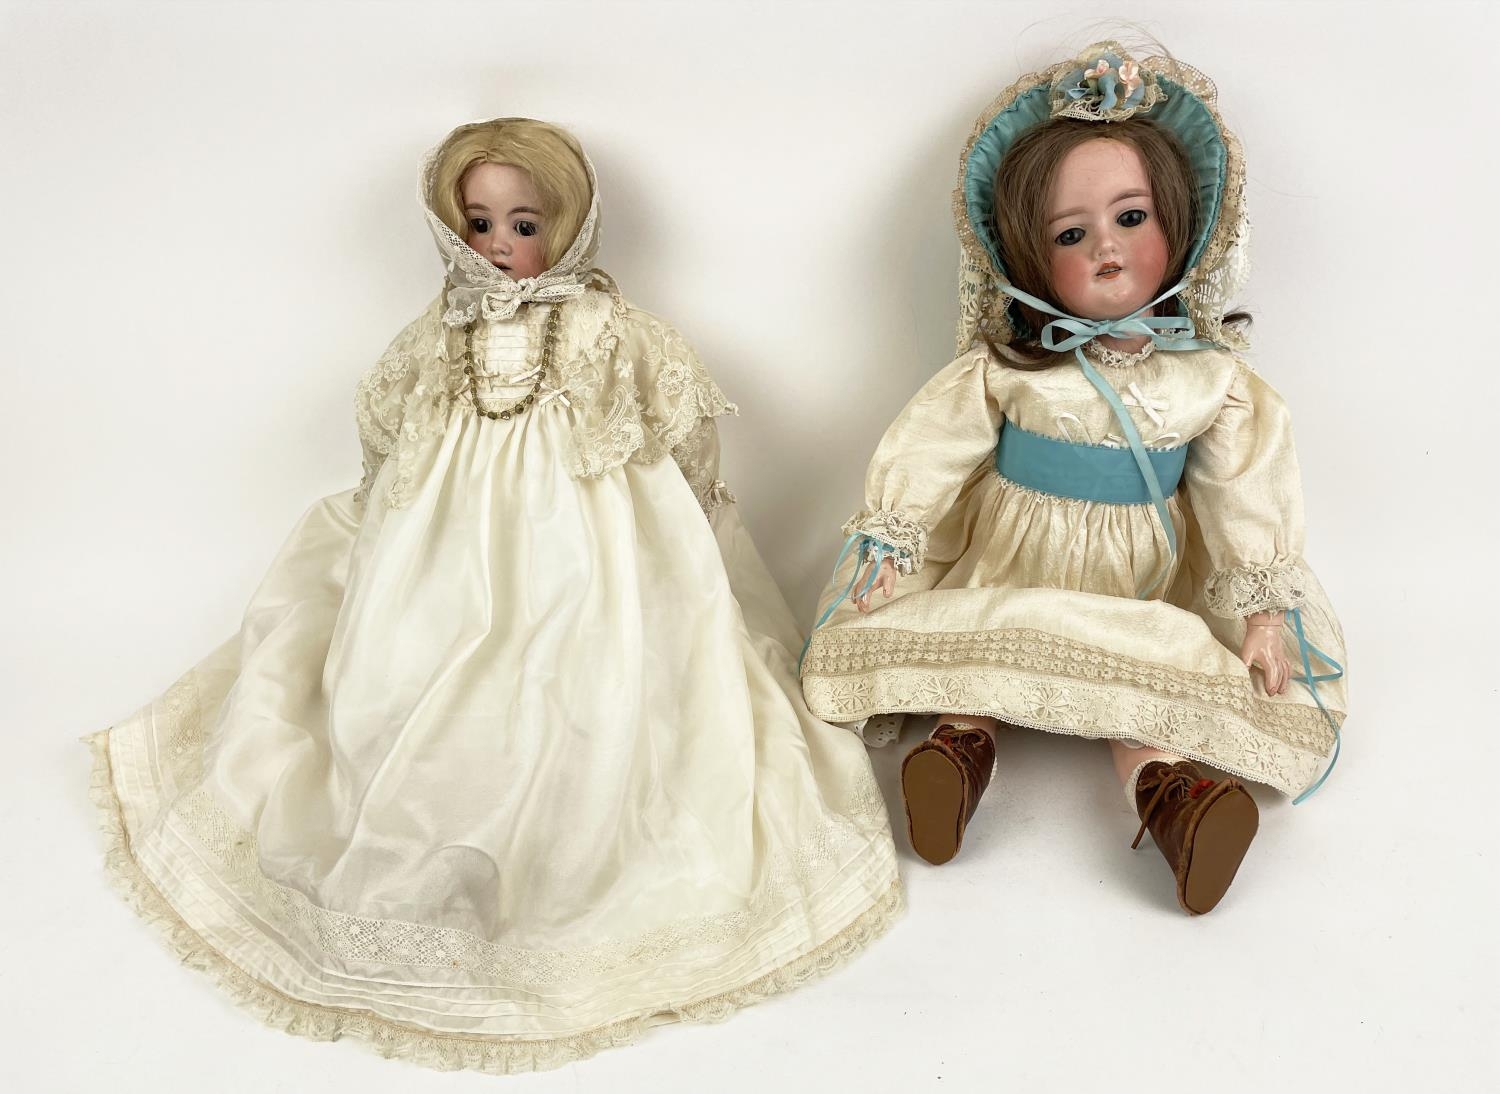 BISQUE HEAD DOLLS, two, c.1900-1910, German by Armand Marseille Kopplesdorf. (2) - Image 5 of 10